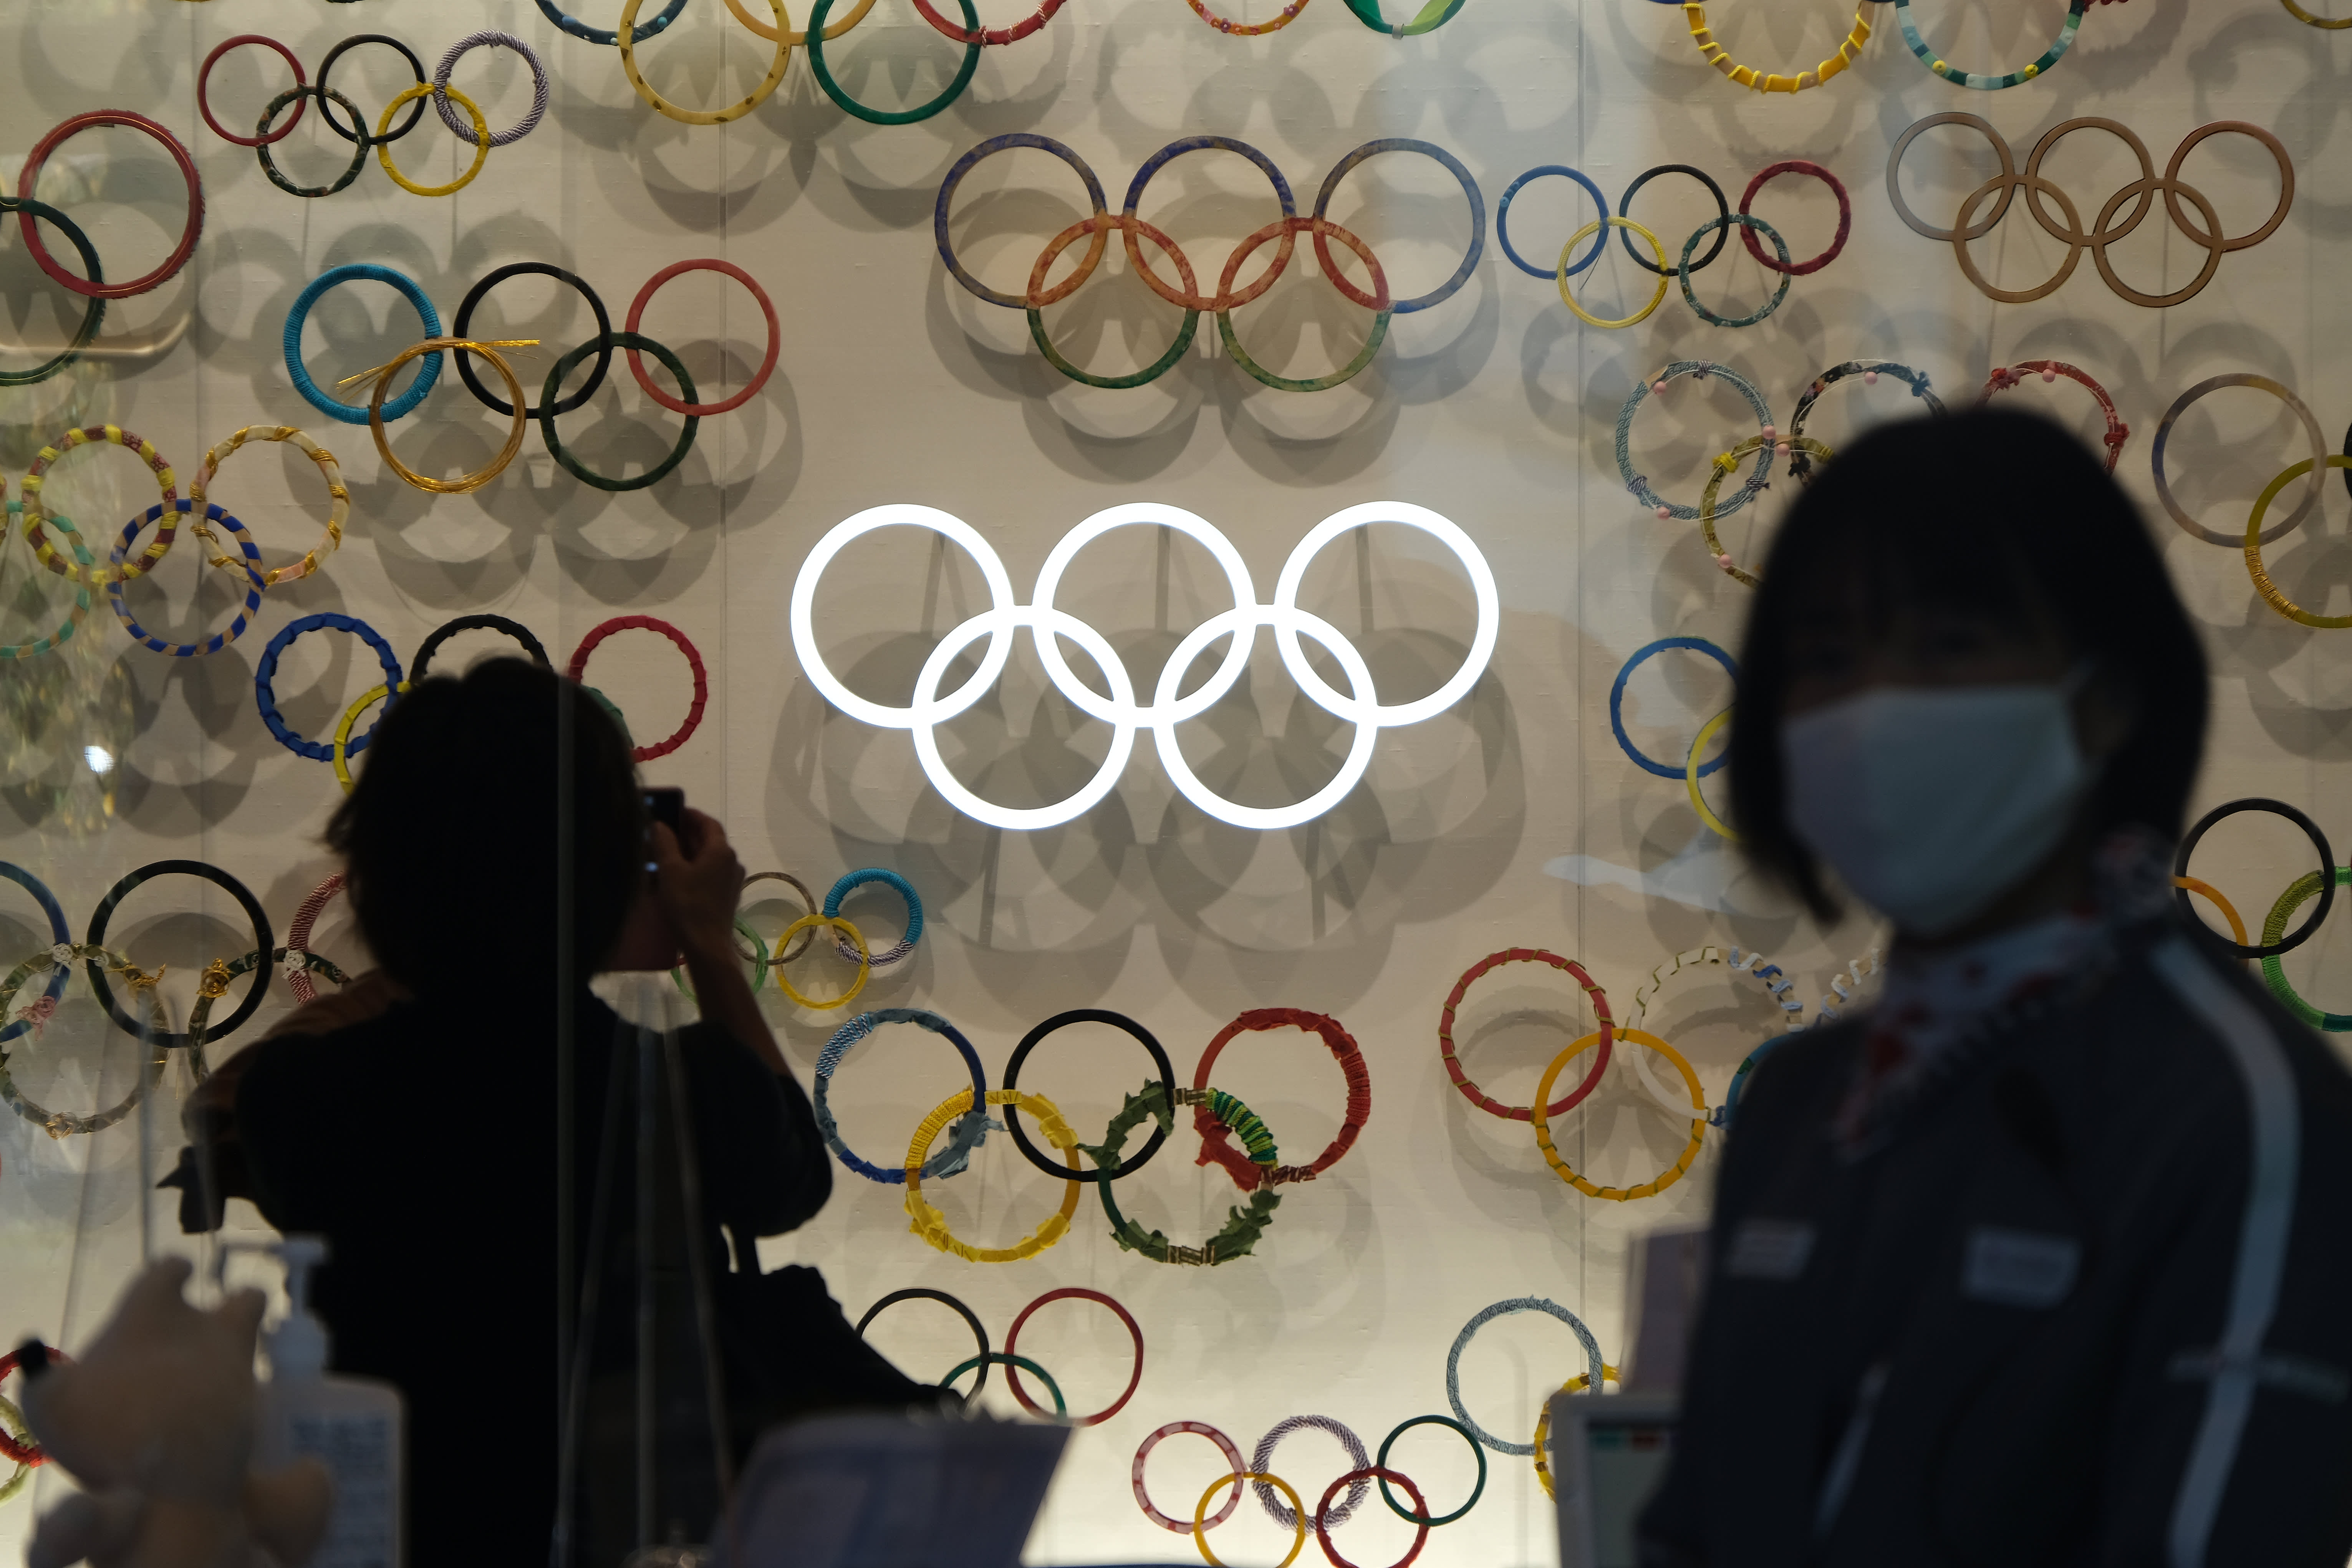 International spectators to be barred from entering Japan for Olympics